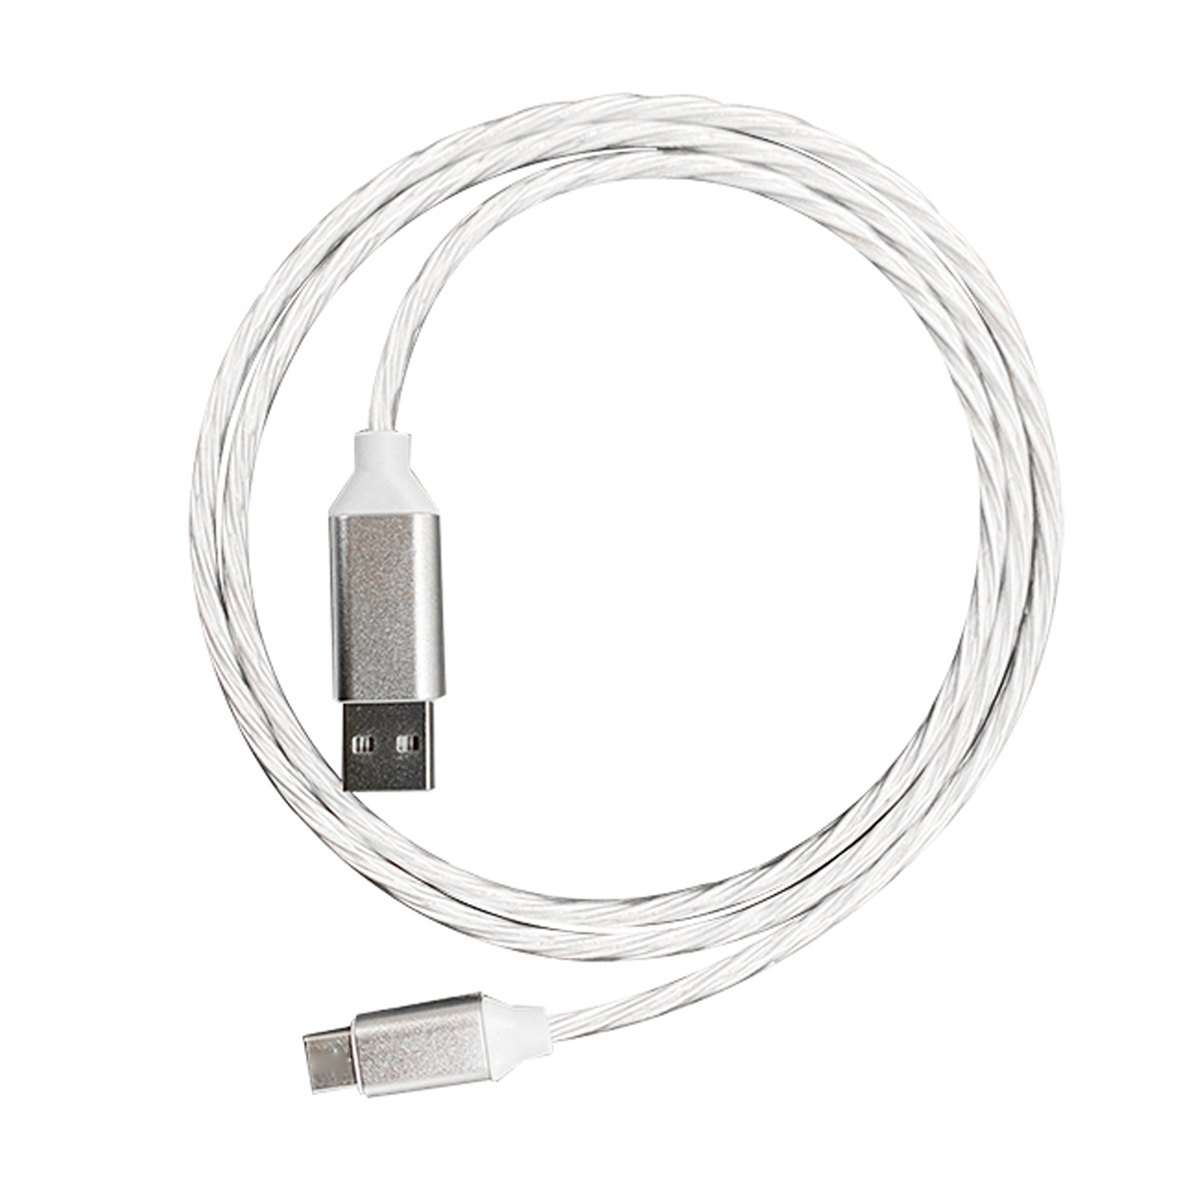 Platinet USB USB A - USB Type-C charging cable with LED color light effect WHITE - 2A, 1m, *USBAM, *USBCM